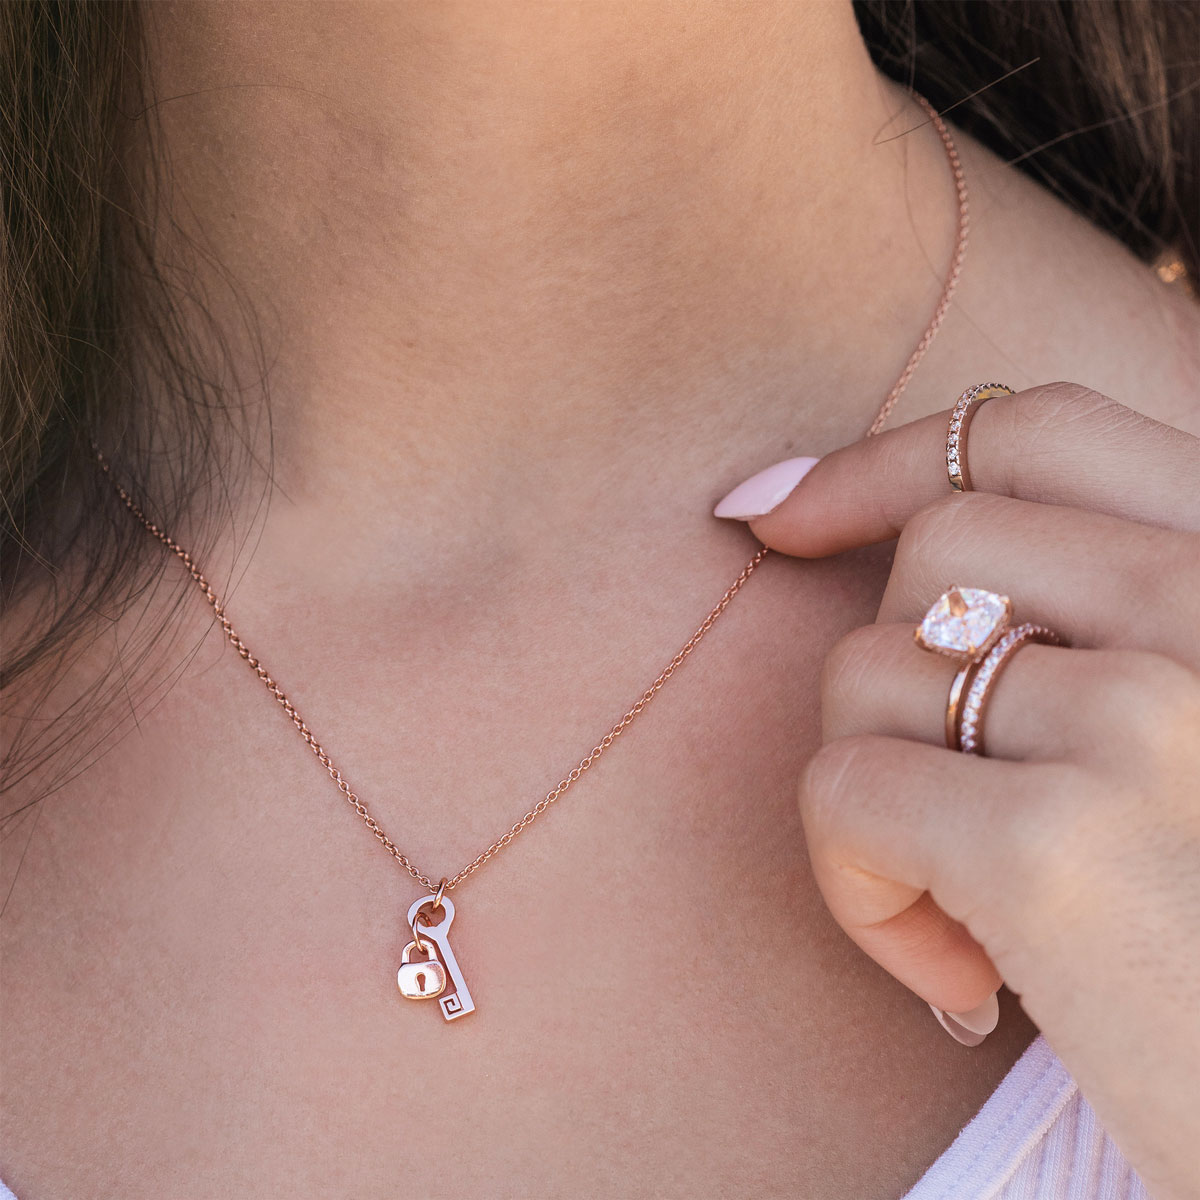 Cute rose gold lock and key necklace on model